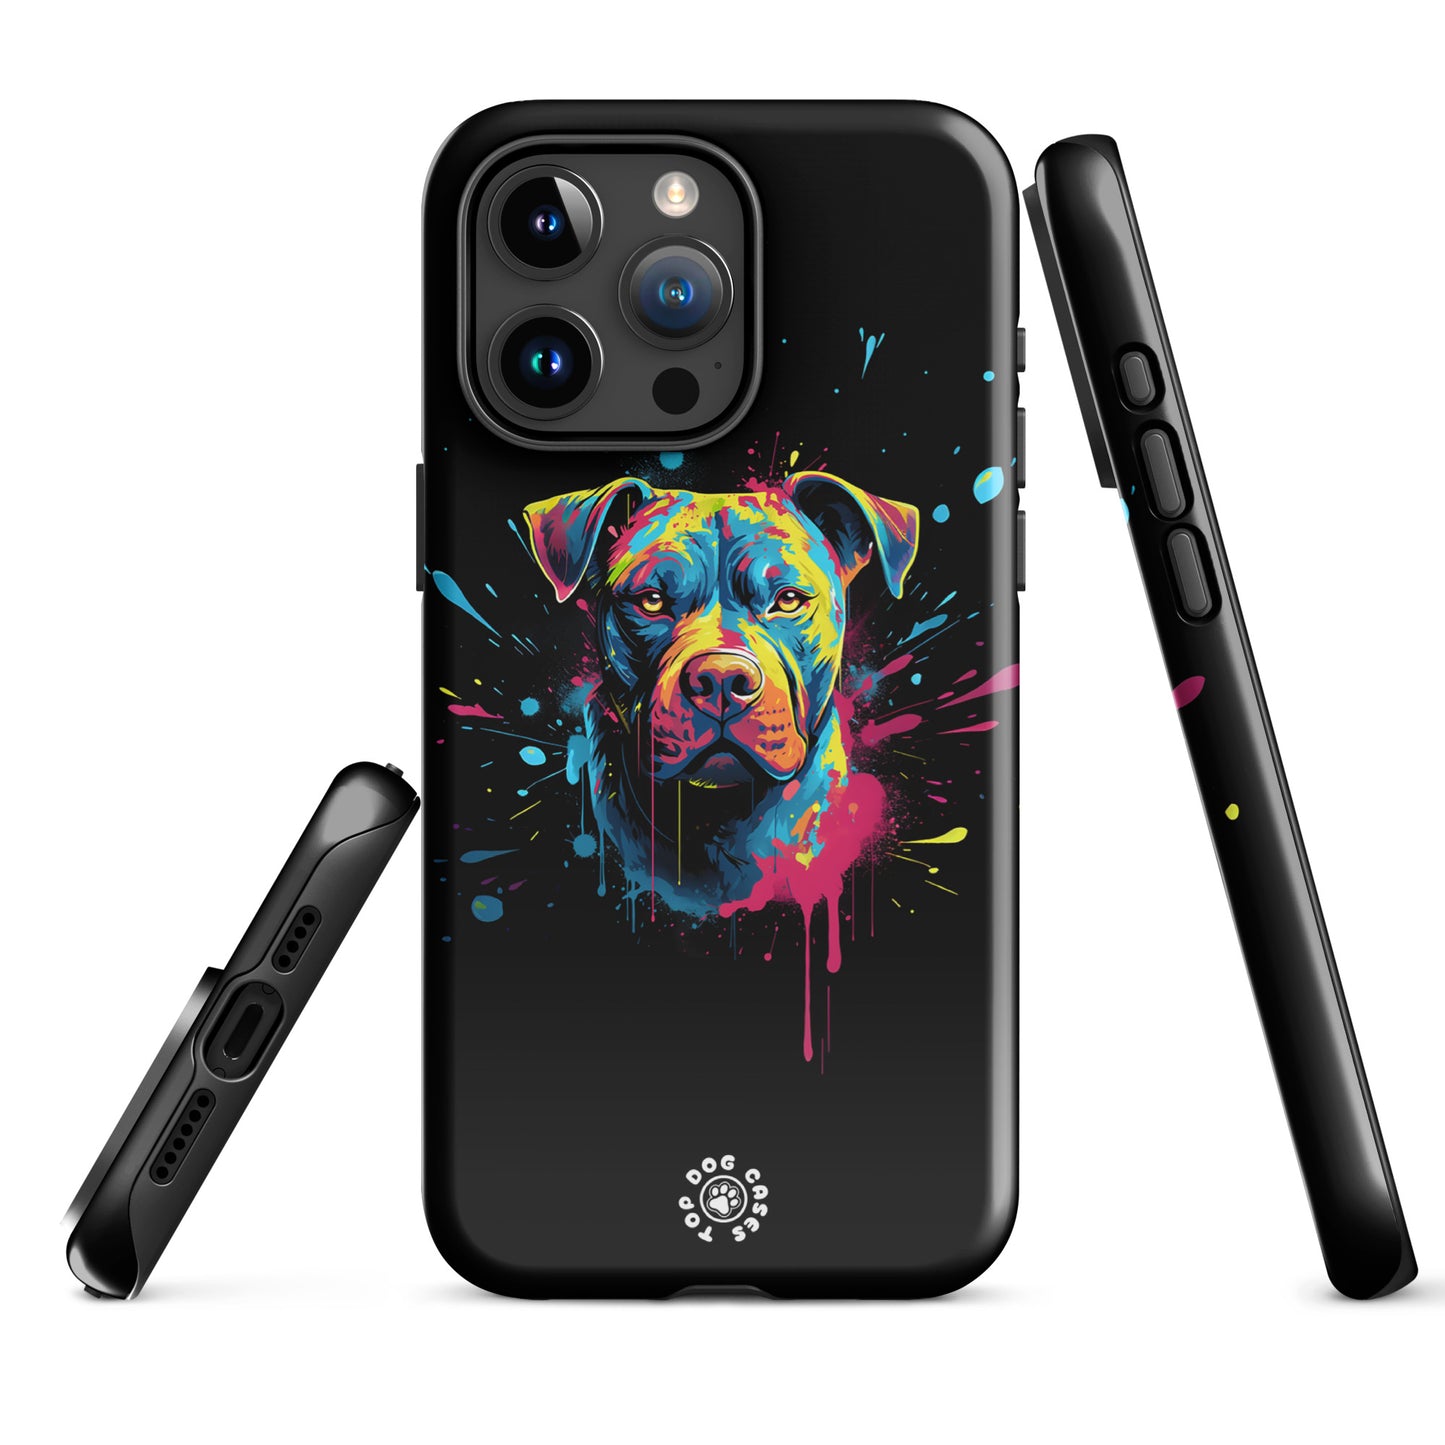 Pit Bull - Colorful Phone Case - iPhone Case - Top Dog Cases - #ColorfulPhoneCases, #iPhone, #iPhone11, #iphone11case, #iPhone12, #iPhone12case, #iPhone13, #iPhone13case, #iPhone13DogCase, #iPhone13Mini, #iPhone13Pro, #iPhone13ProMax, #iPhone14, #iPhone14case, #iPhone14DogCase, #iPhone14Plus, #iPhone14Pluscase, #iPhone14Pro, #iPhone14ProMax, #iPhone14ProMaxCase, #iPhone15, #iPhone15case, #iPhonecase, #iphonedogcase, #Pit Bull